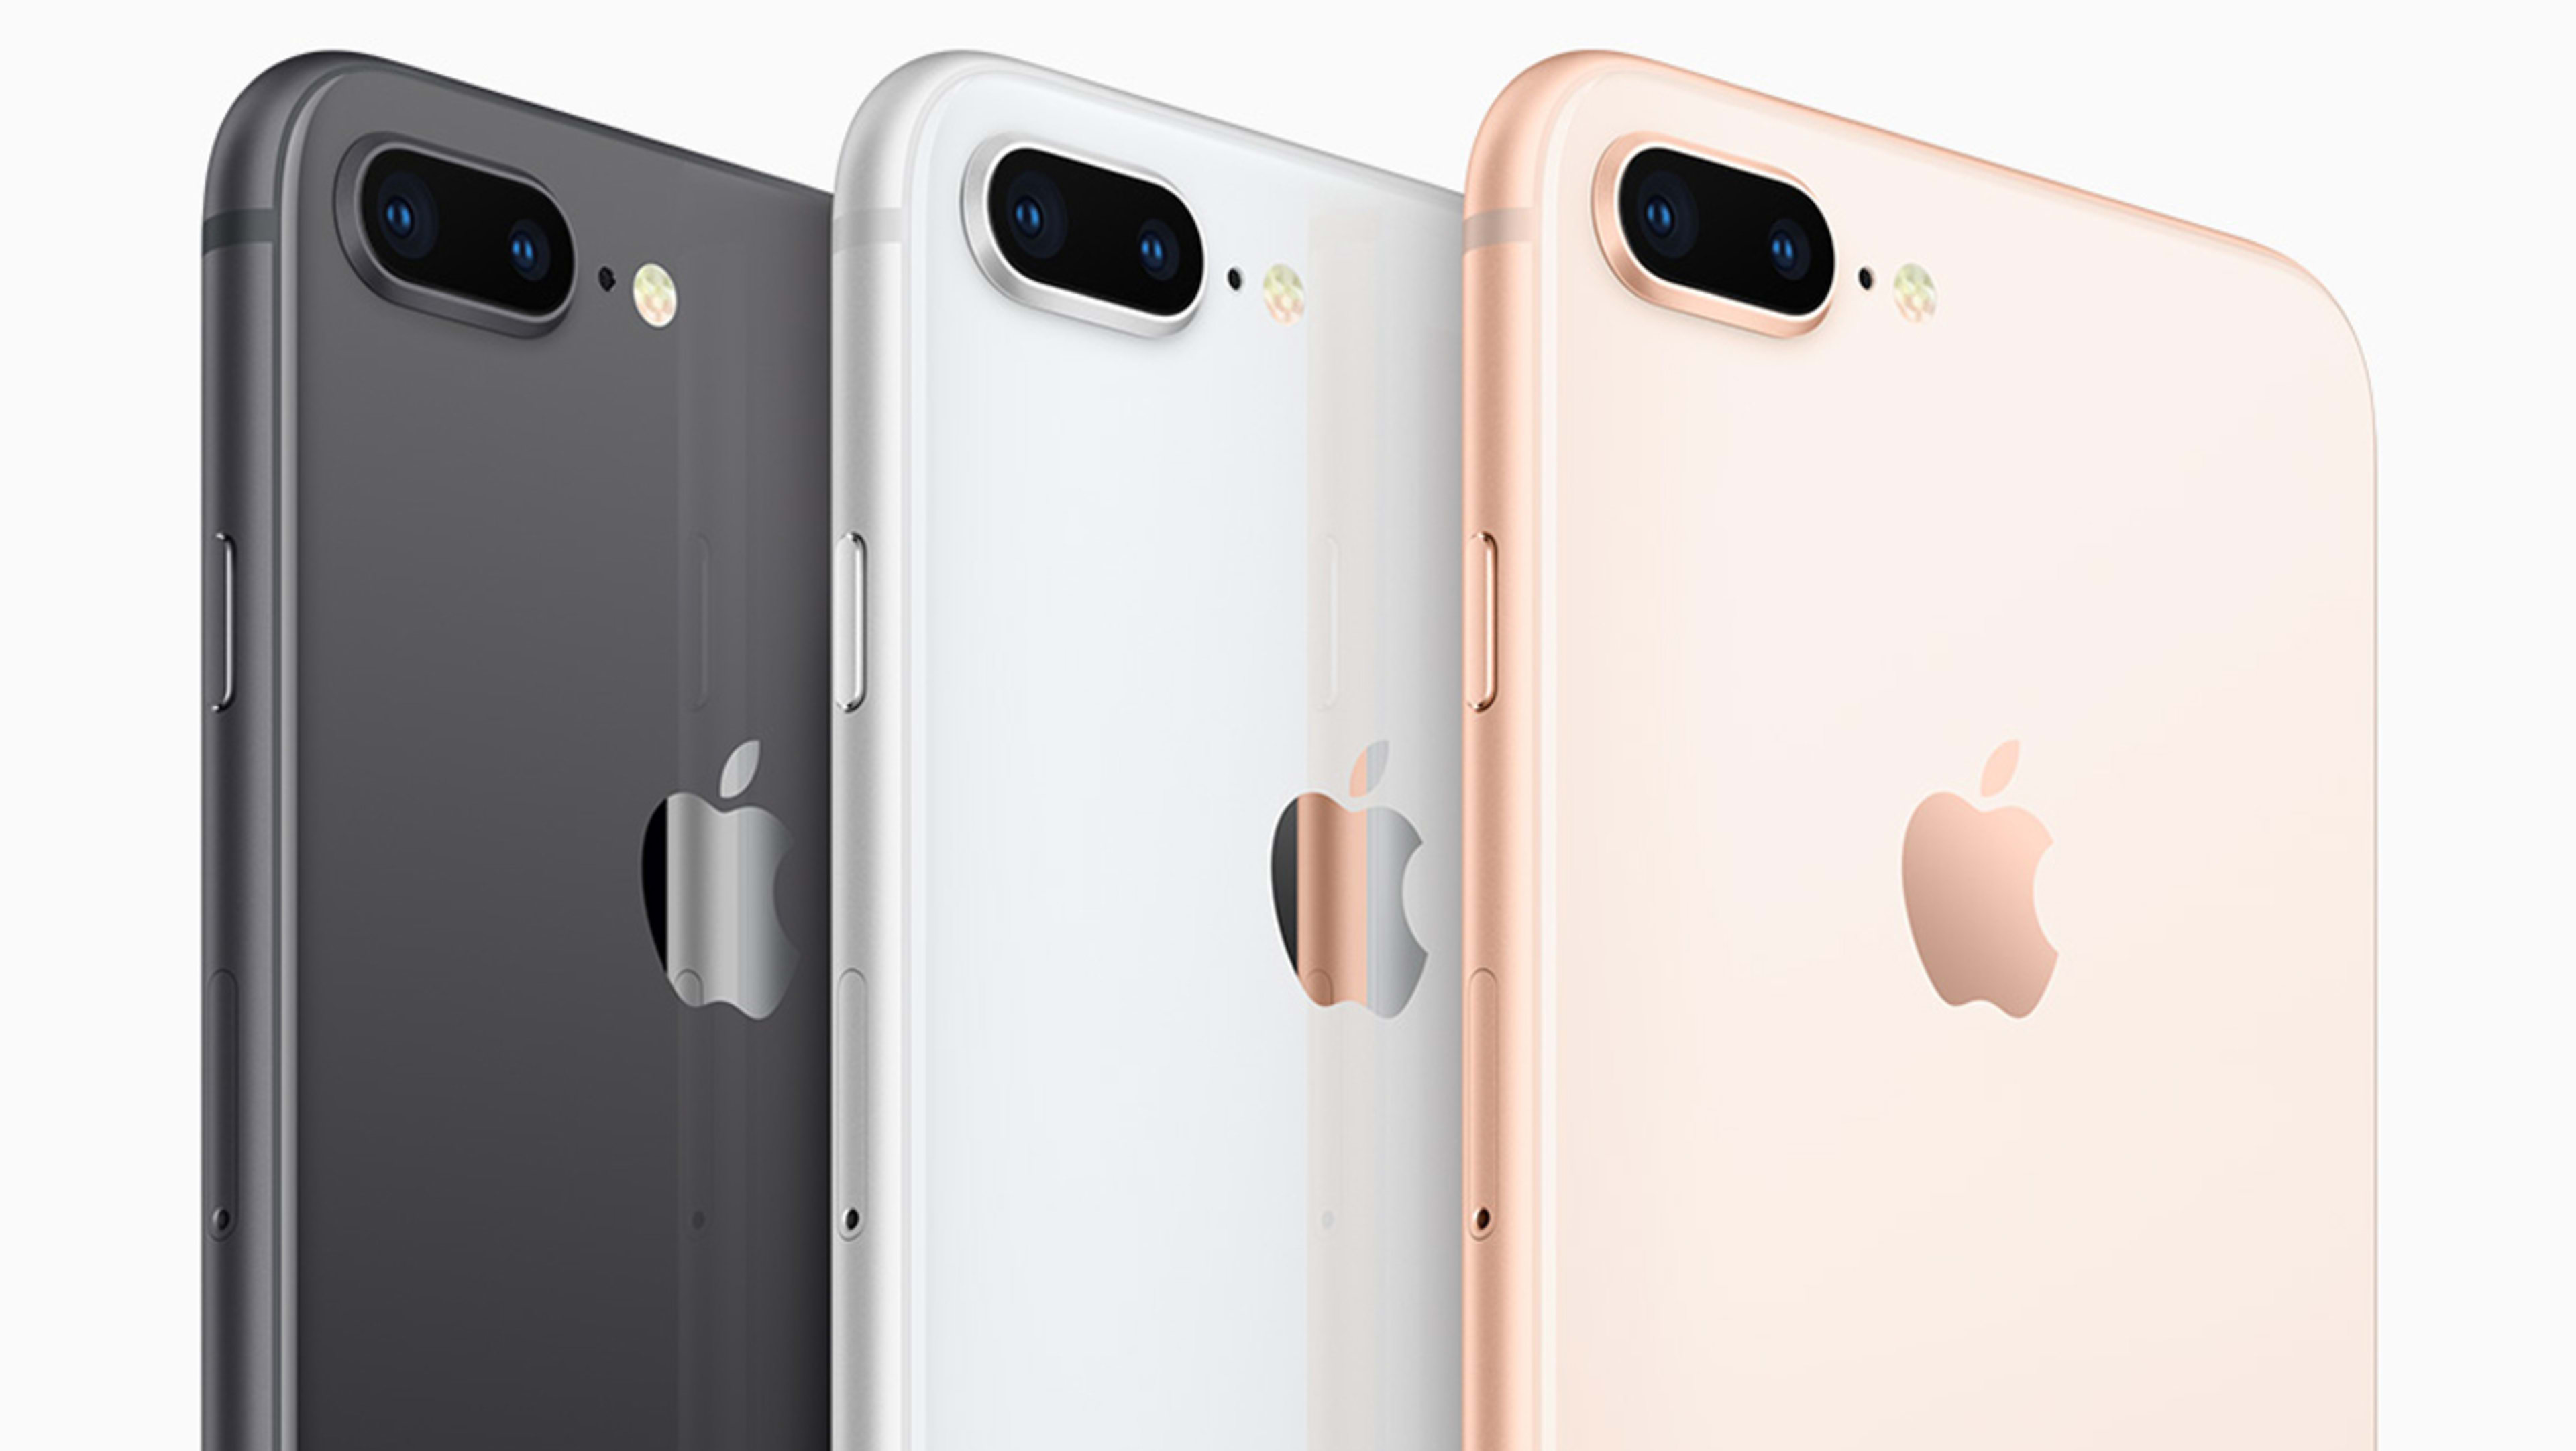 Thanks to iPhone 8 orders, Apple is finally growing again in China